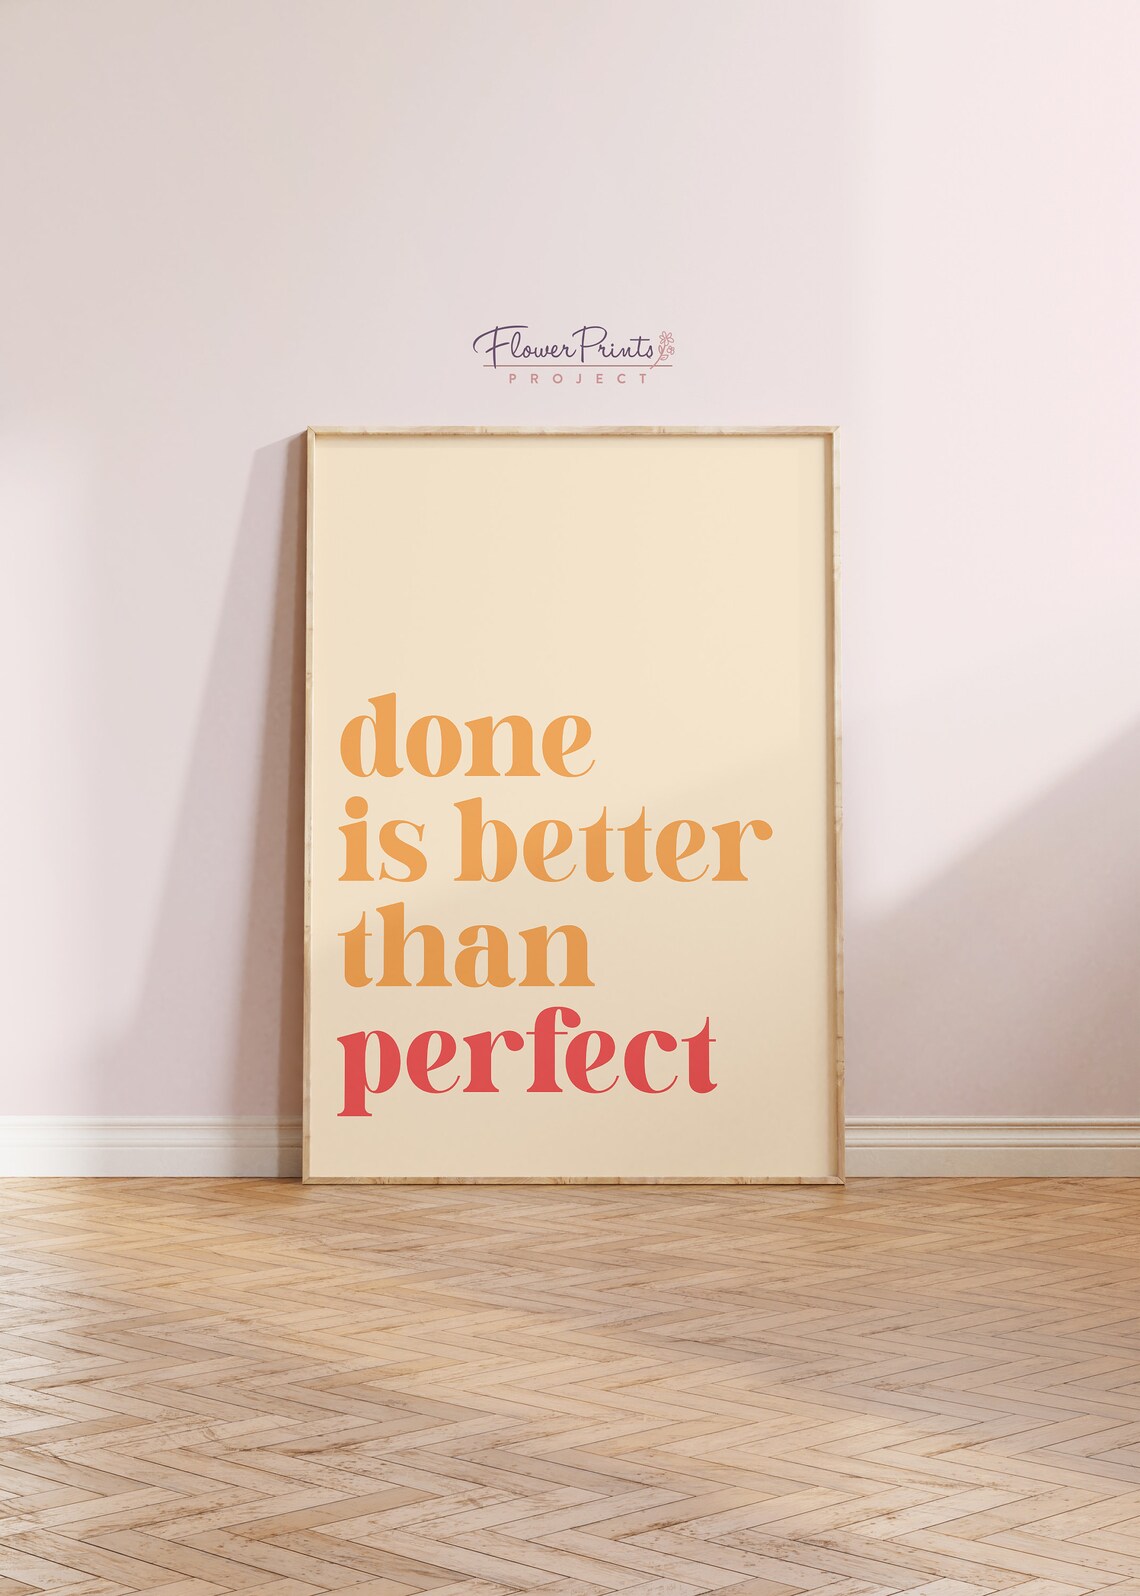 Done is Better Than Perfect Inspirational Wall Art for Women | Etsy